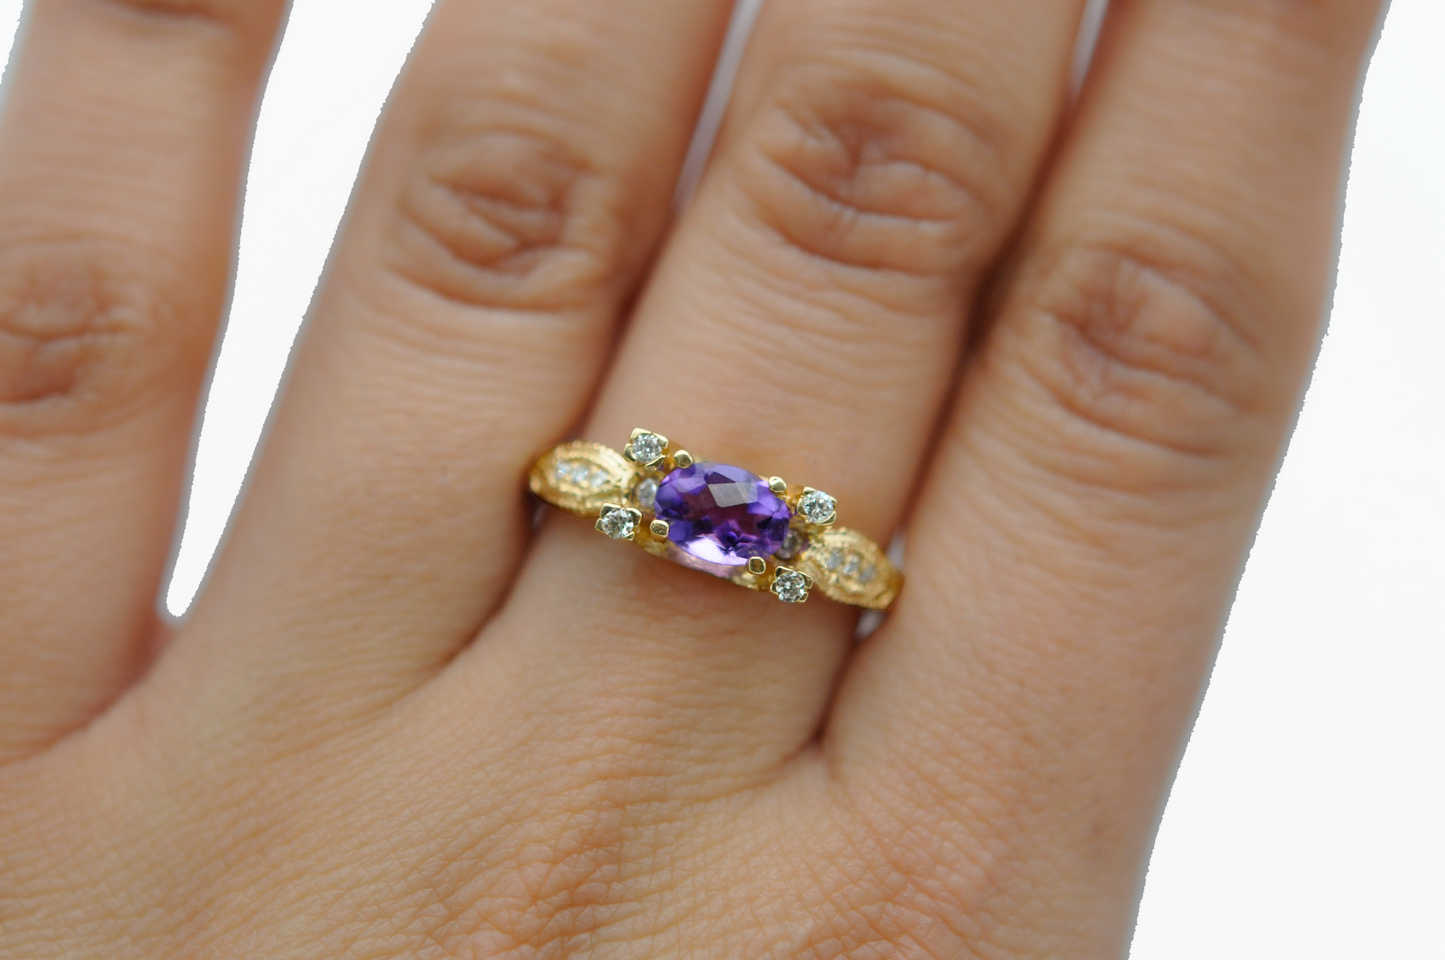 Yellow Gold Vintage Oval Amethyst Ring with Diamond Accents